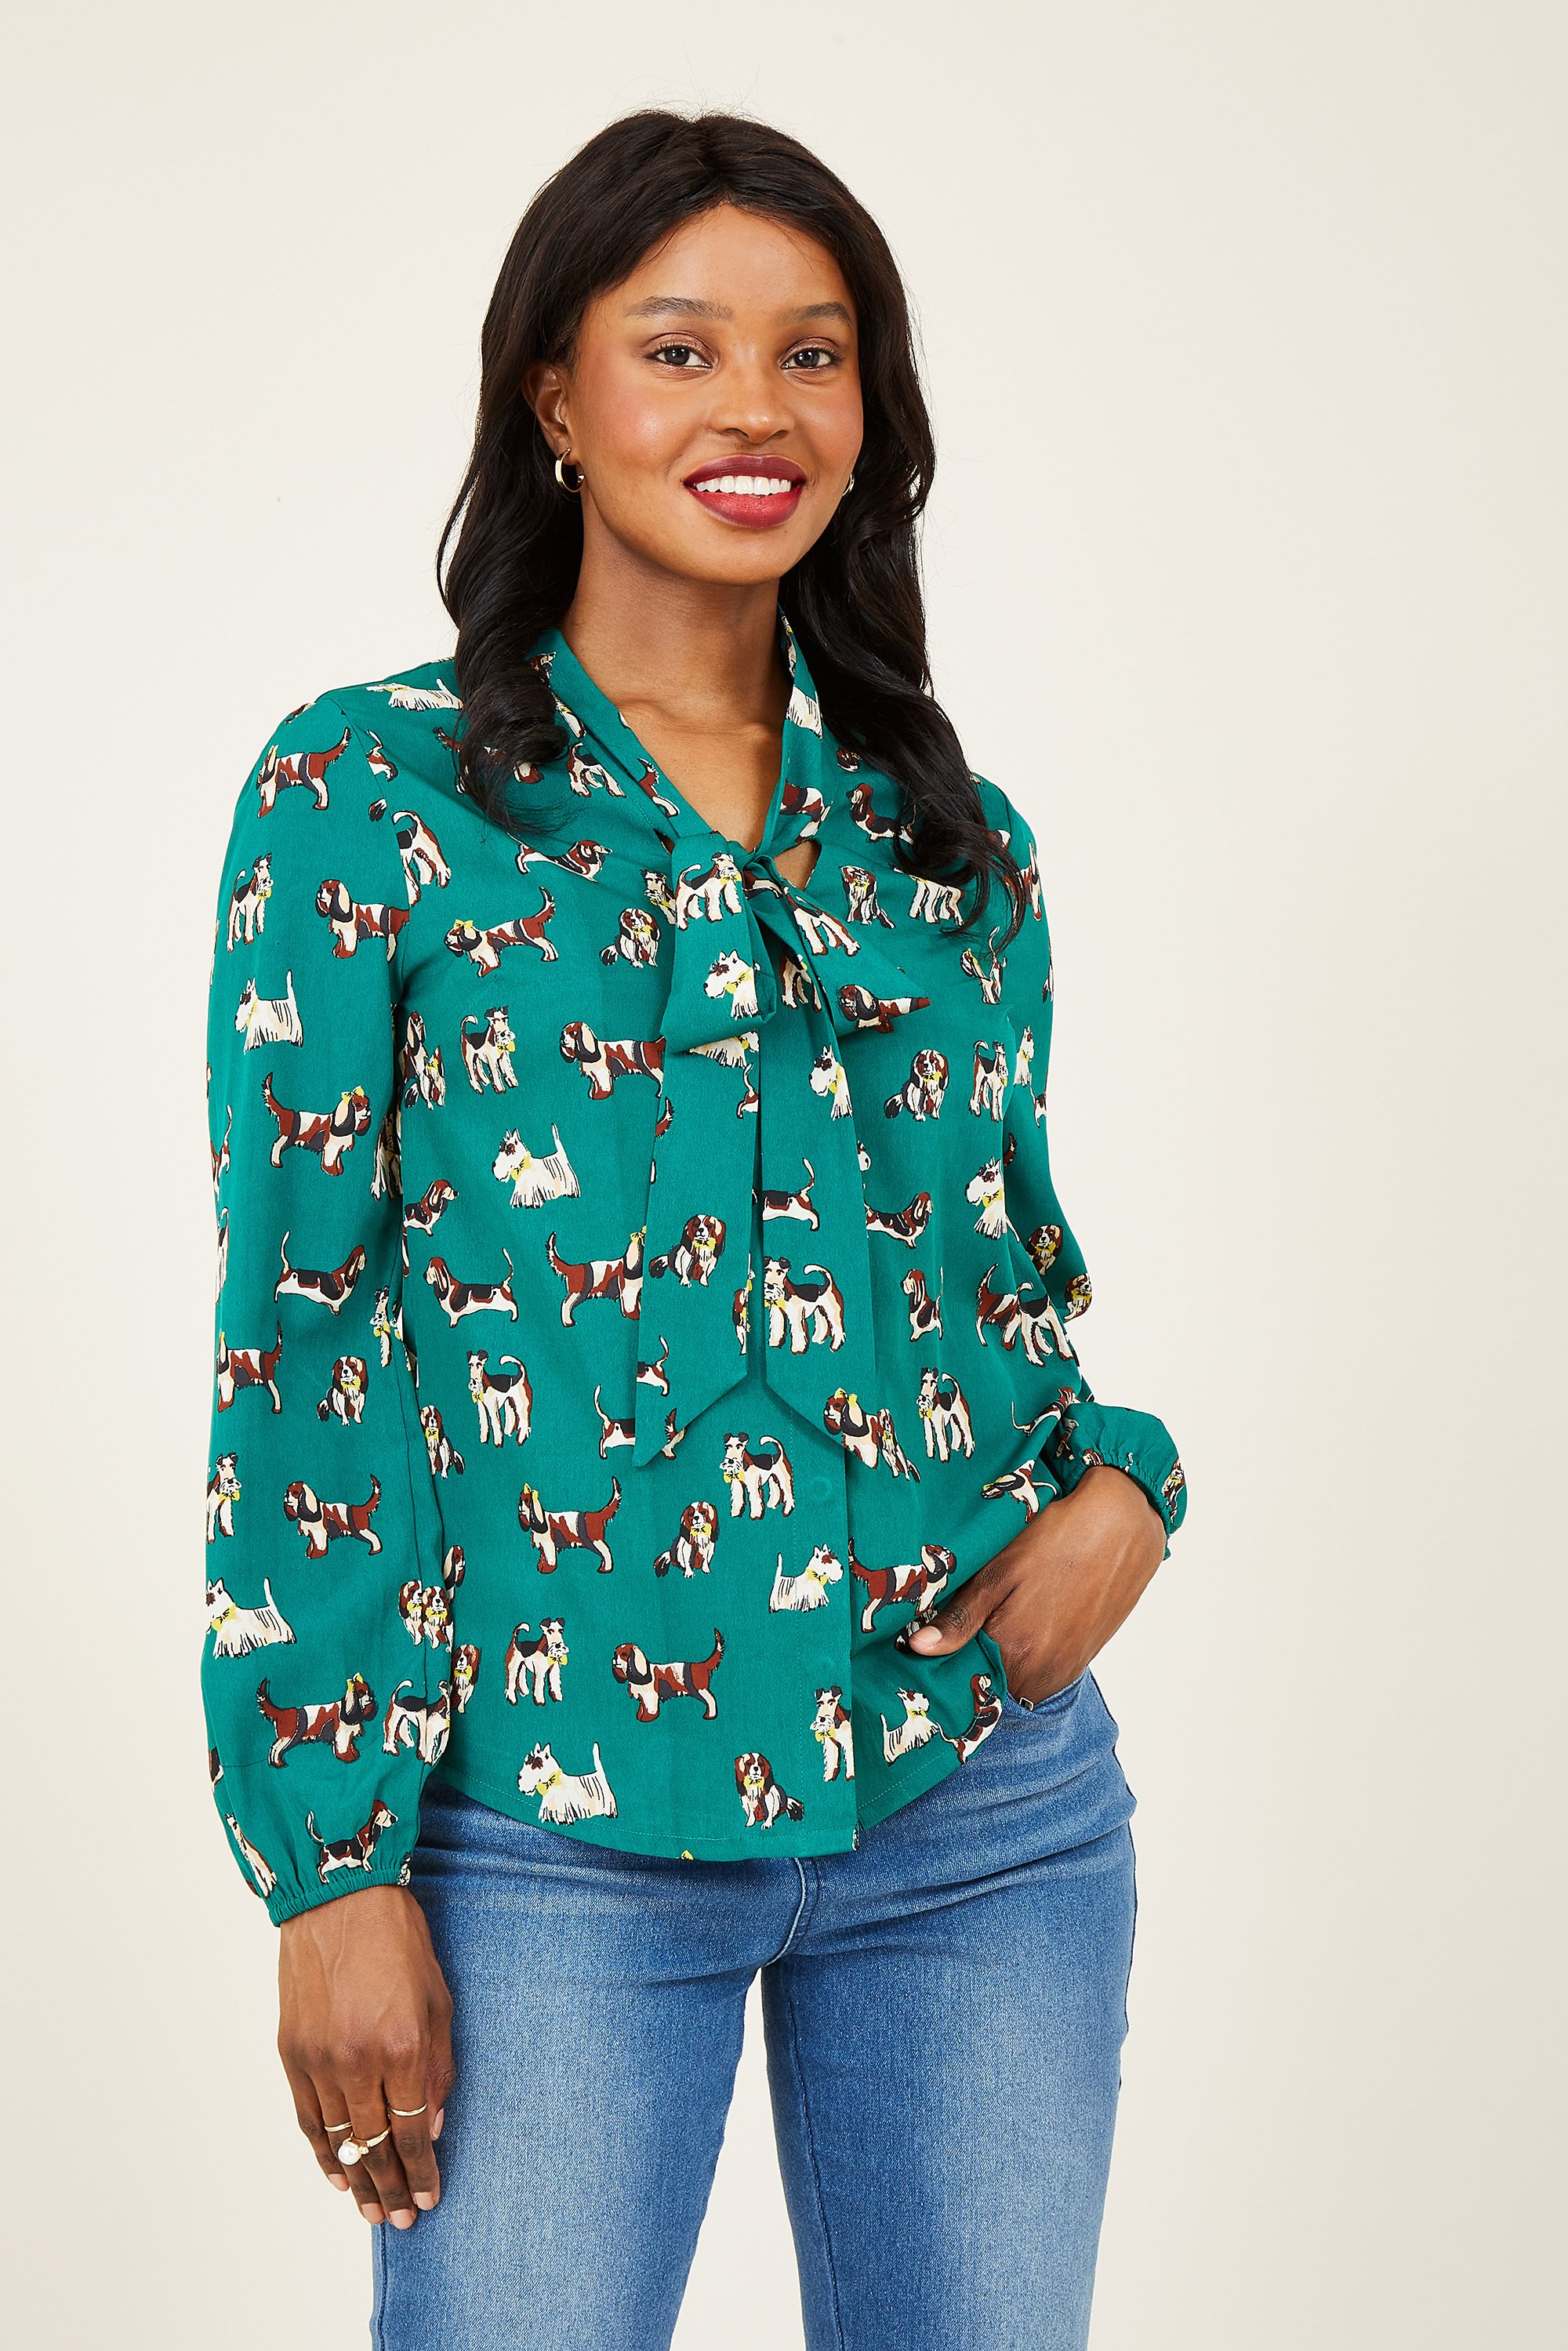 Inject some fun into your staples with our Dog Pussy Bow Blouse. Expertly crafted from light fabric, it's designed with a stylish dog print. The classic long sleeves and relaxed shape encourage a casual feel, paired with a pussy bow neckline to tie your look together. It's weekend and weekday appropriate.